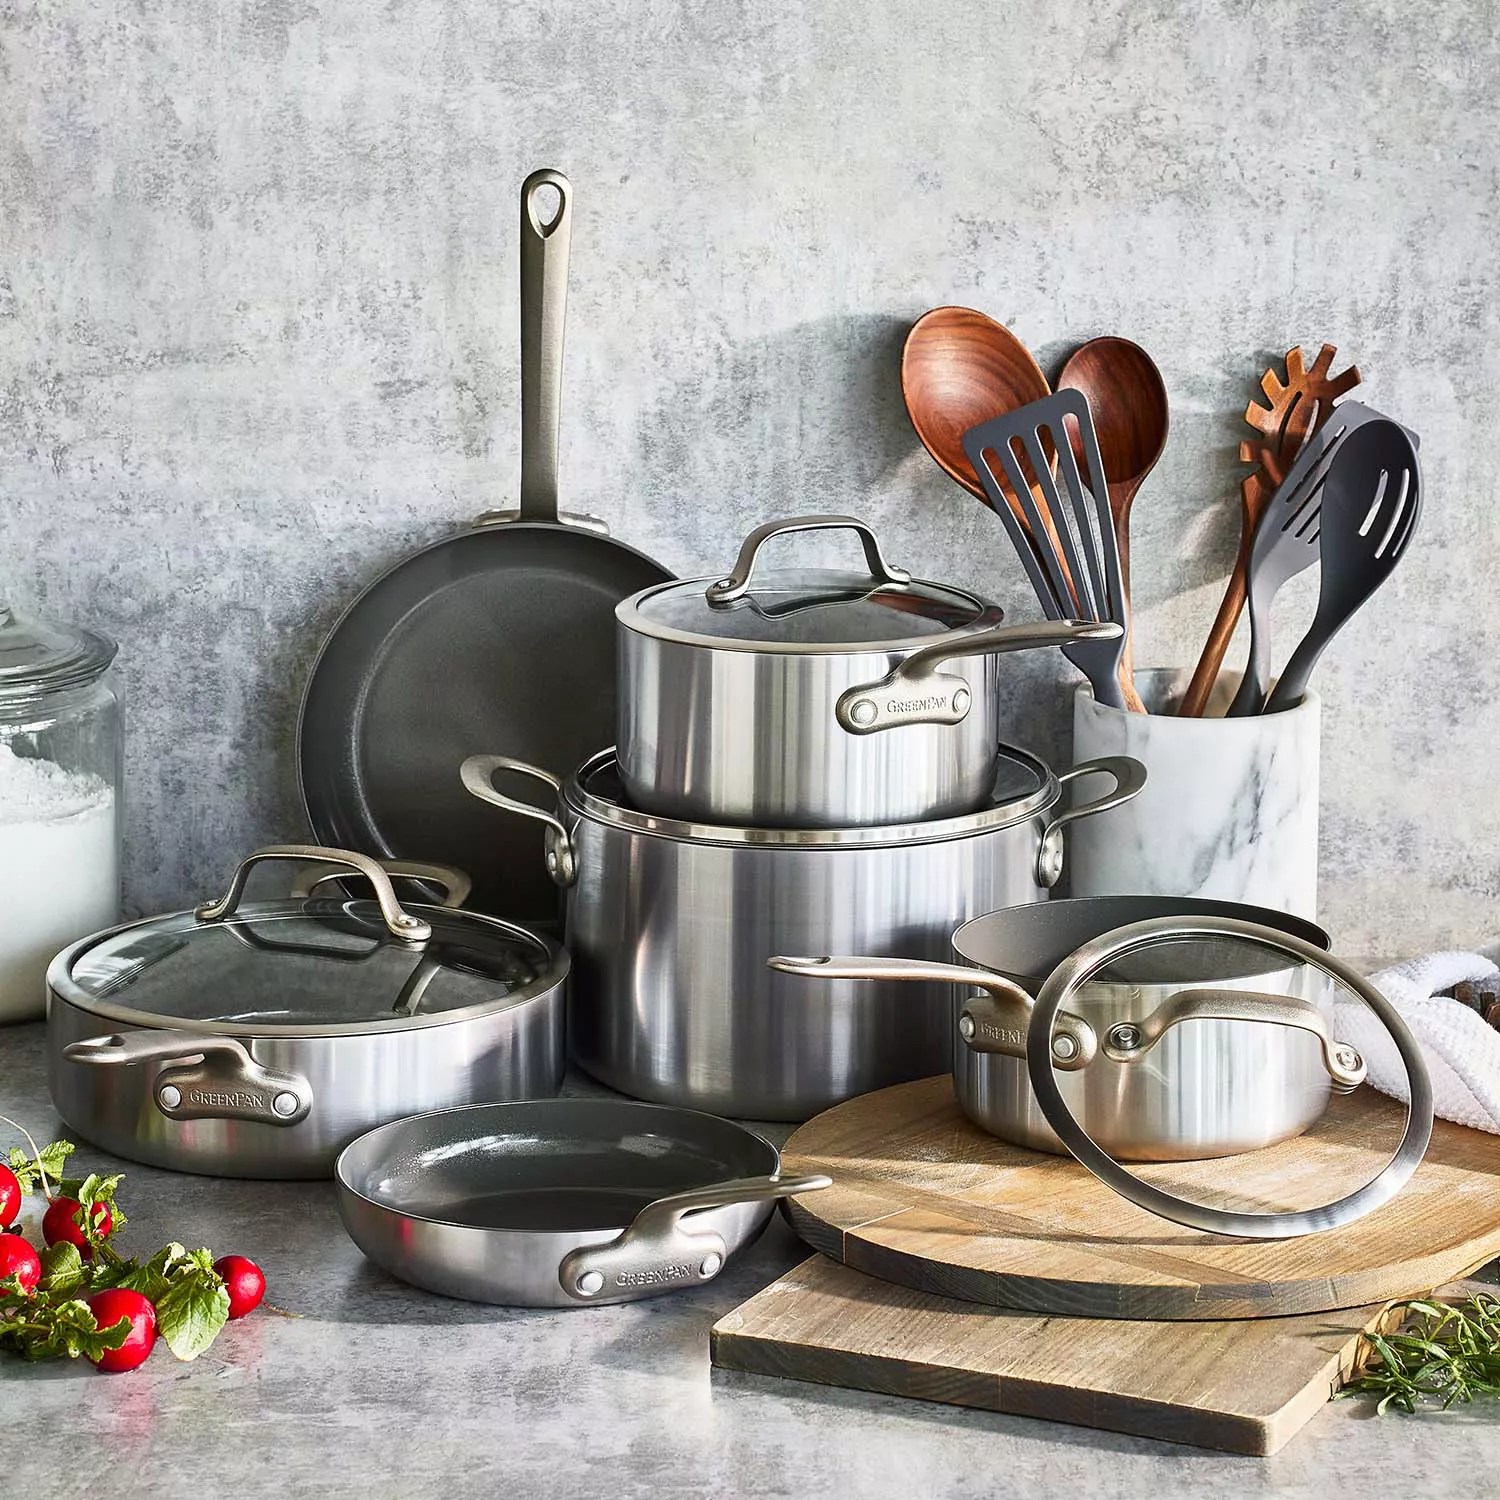 Black Friday steal: Save $150 on this GreenPan ceramic cookware set -  Reviewed